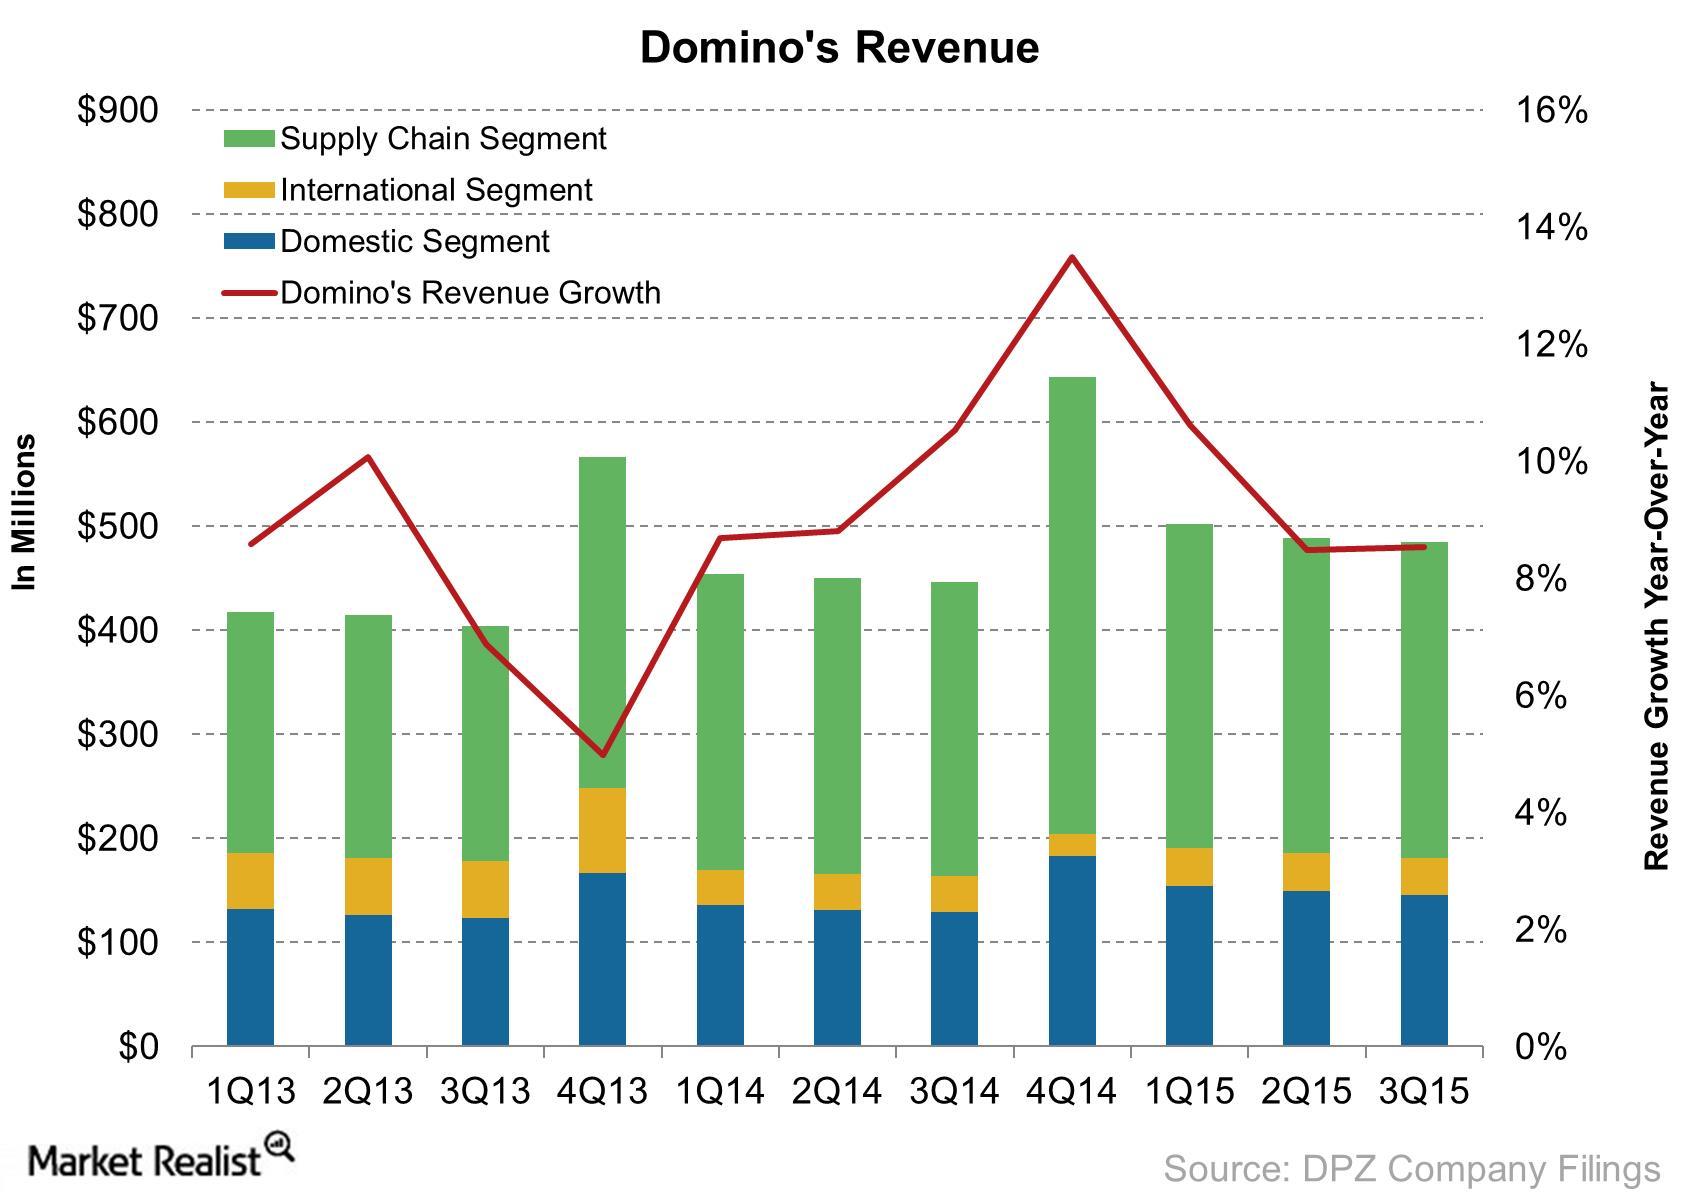 Why US Economic Activity Is Important to Domino’s Pizza